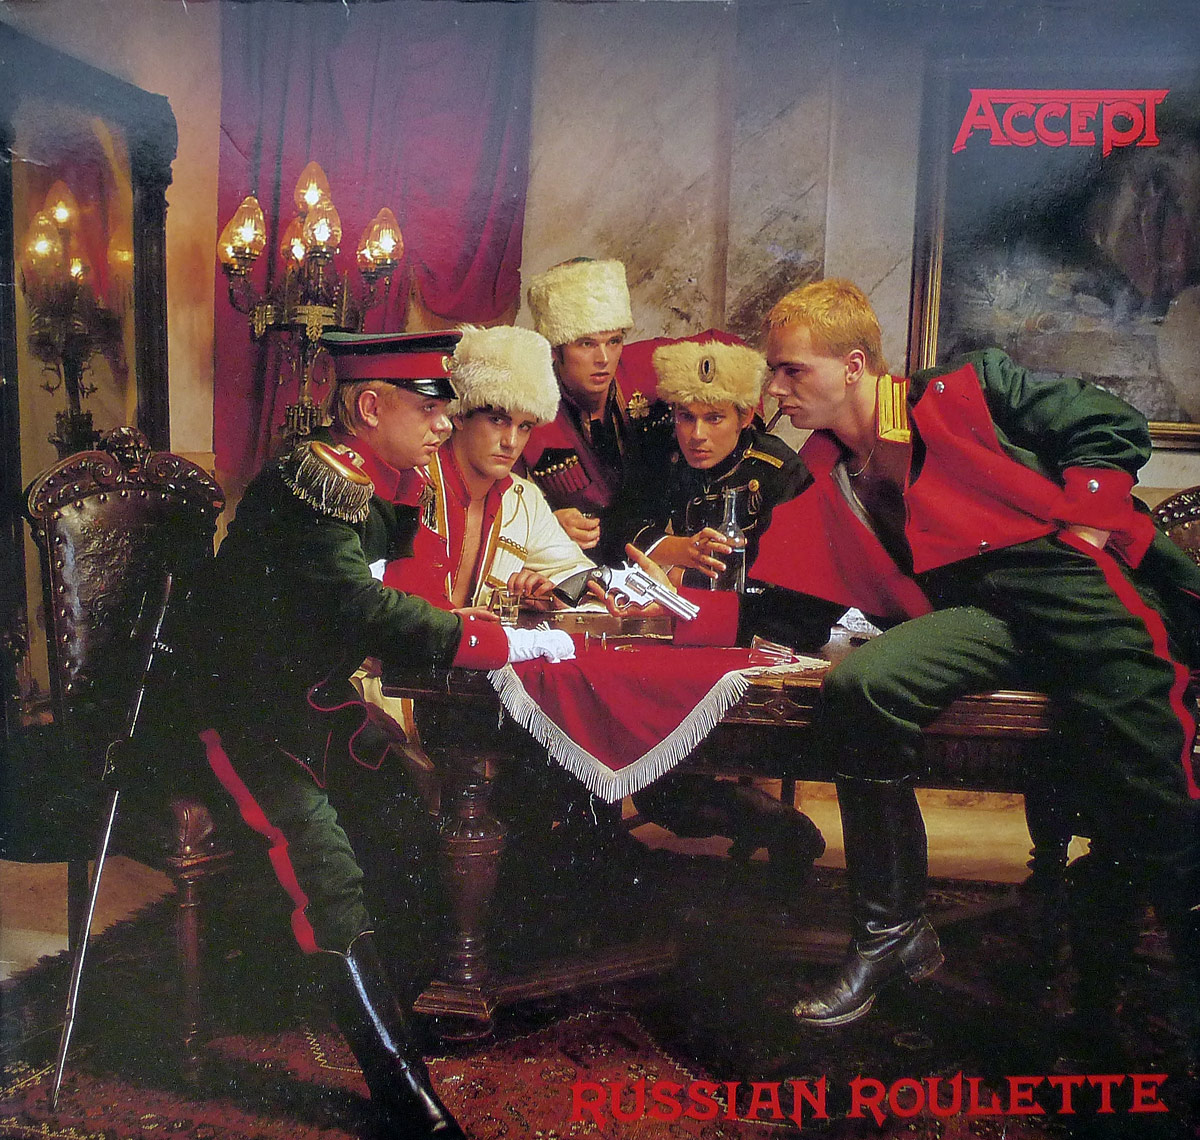 Large Hires Photo of Front Cover of "Russian Roulette" by Accept  